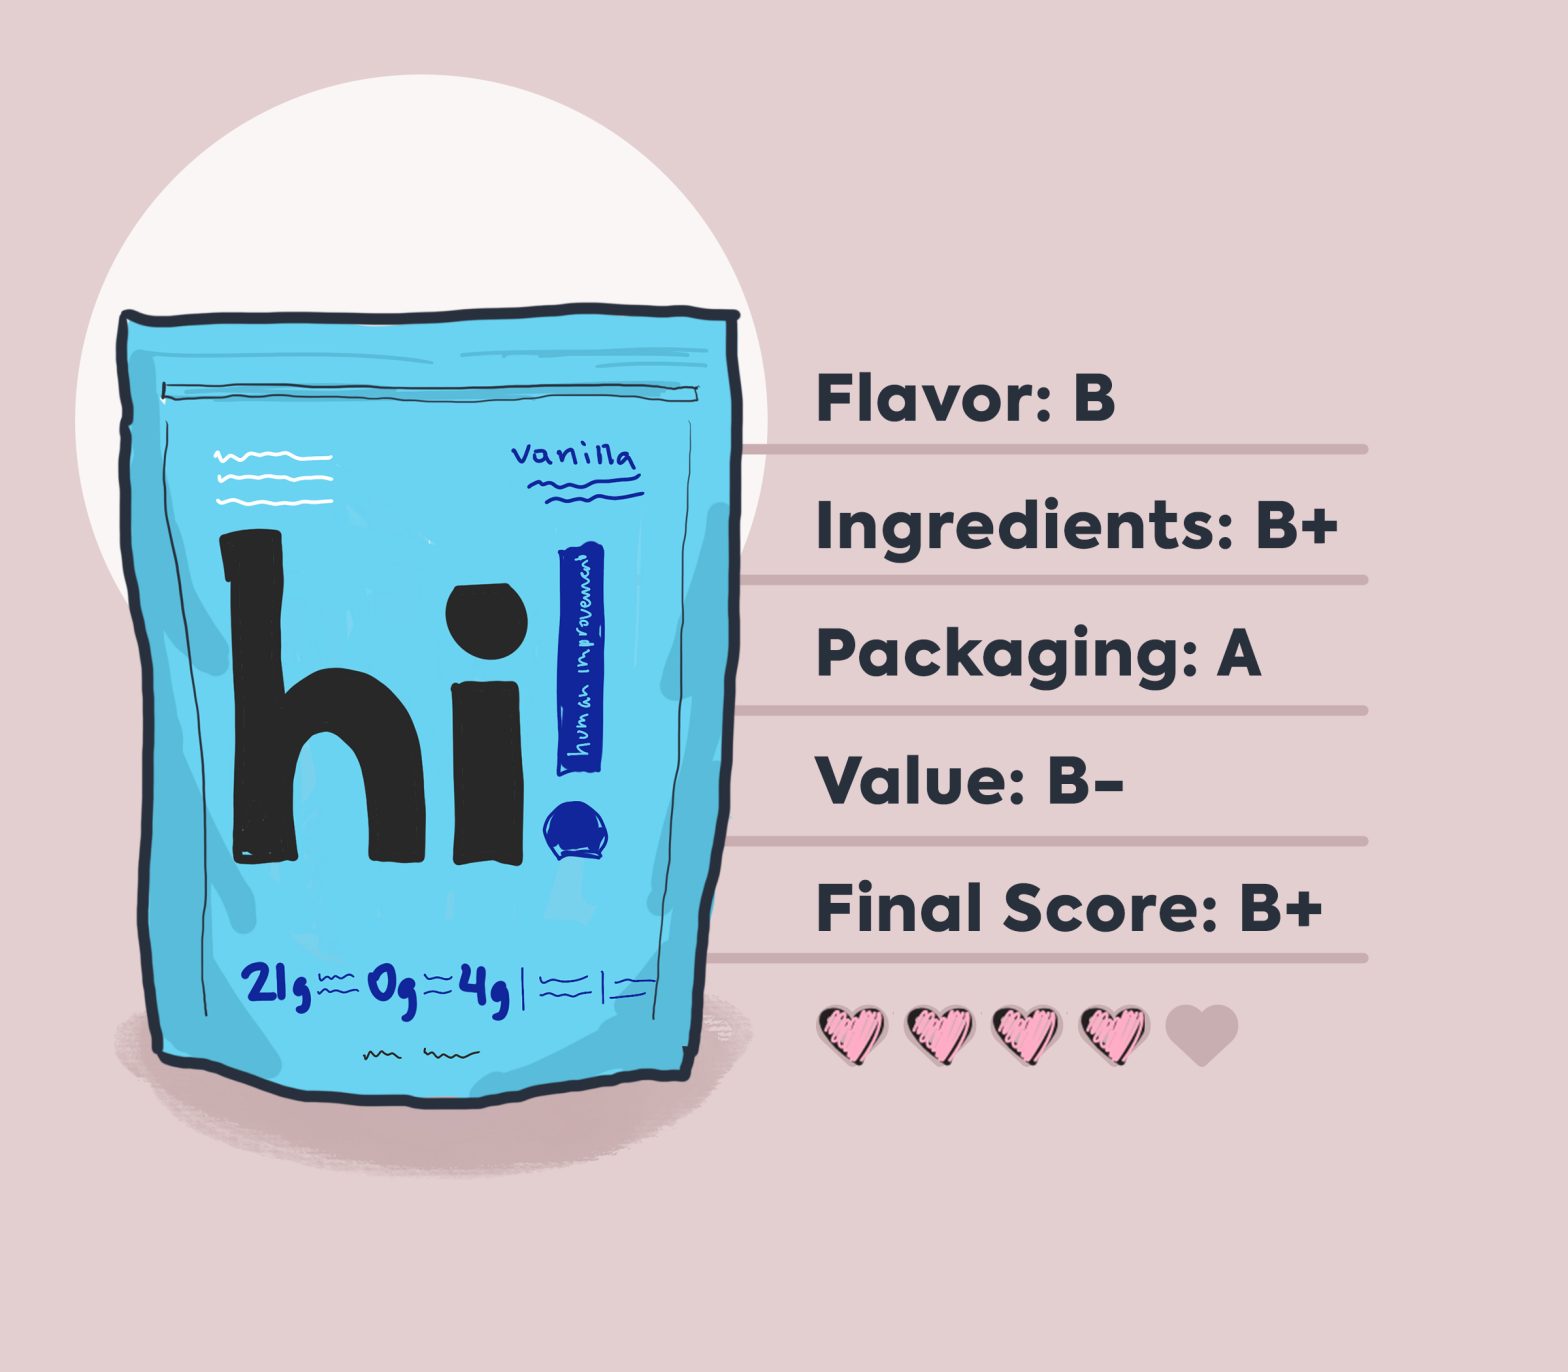 hand-drawn illustration of human improvement packaging with infographic and review summary score over tan background